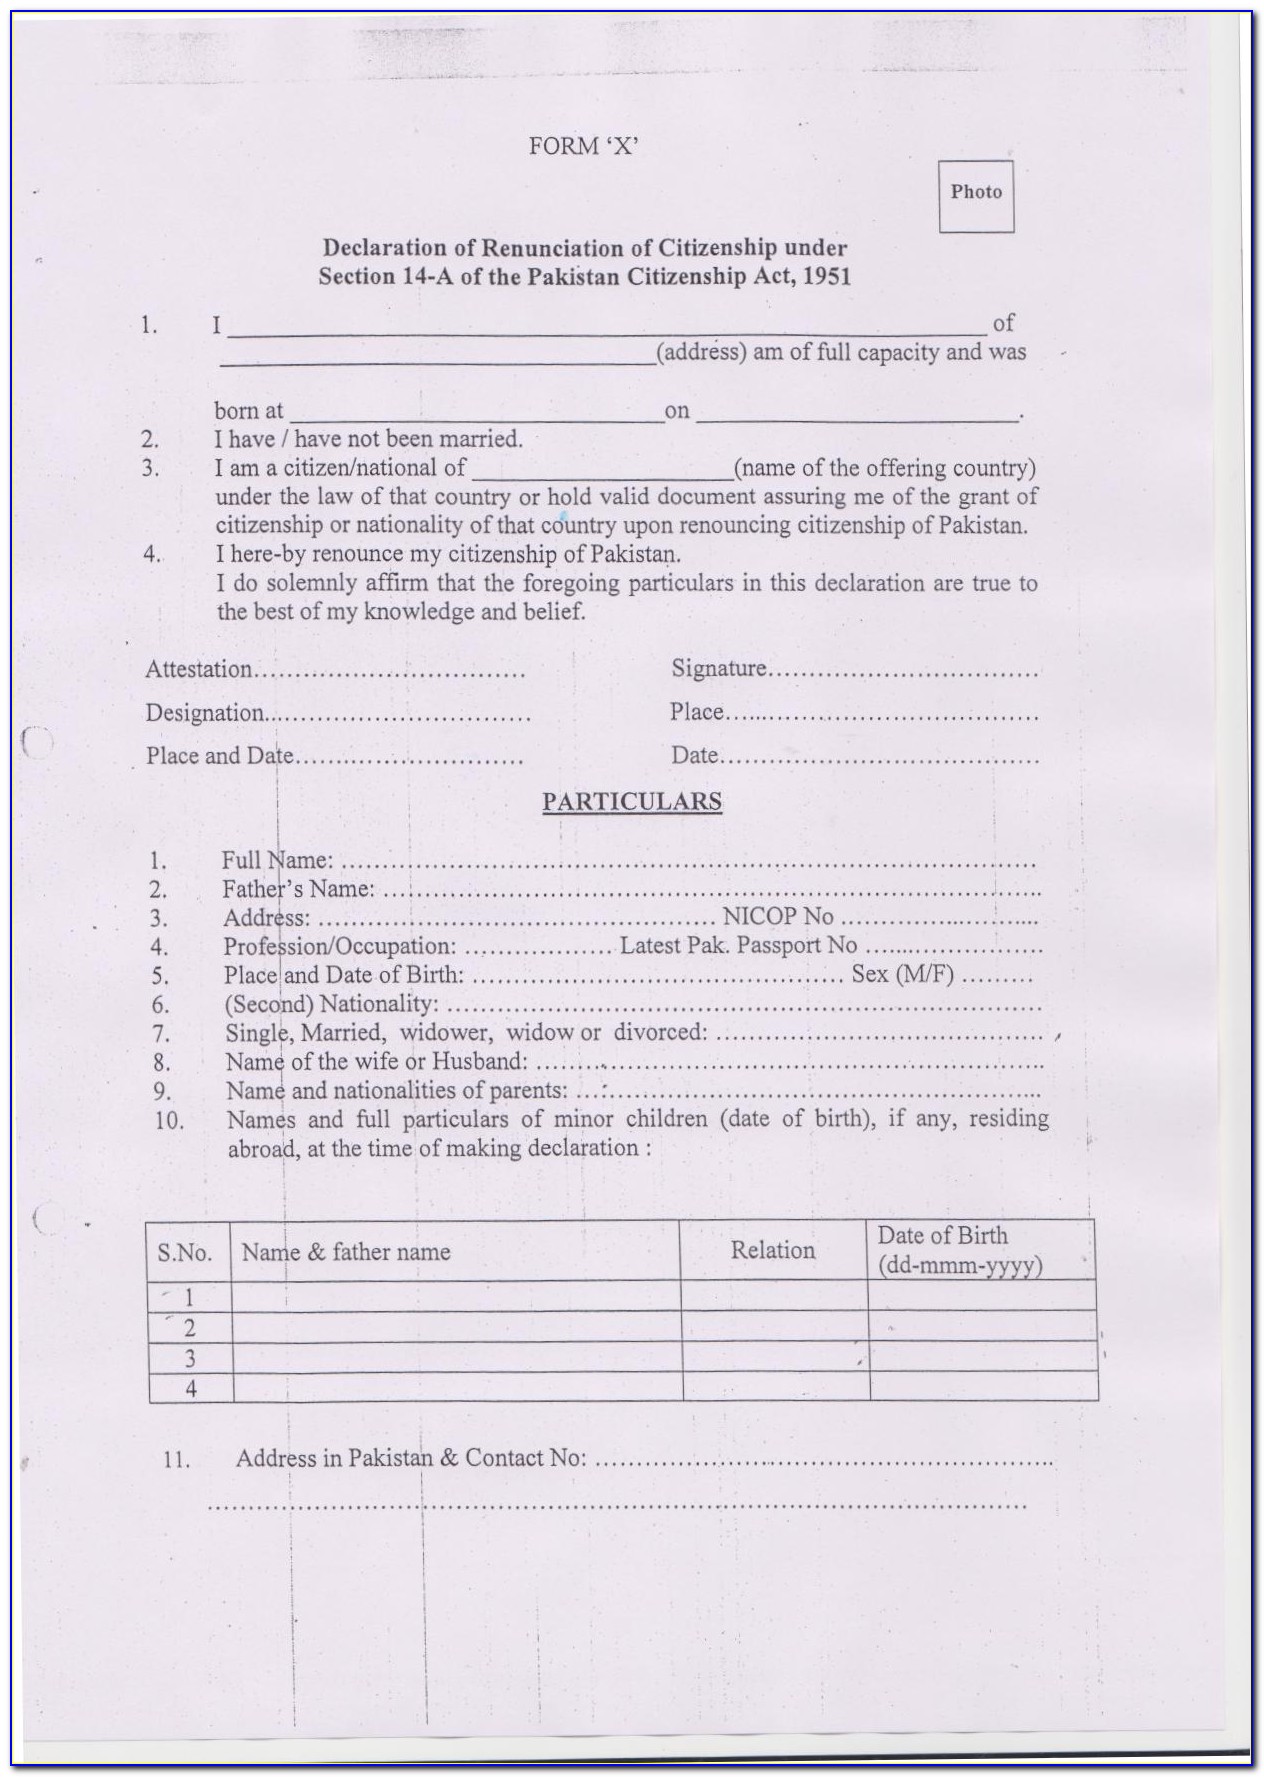 Indian Visa Requirement For Pakistani Nationals